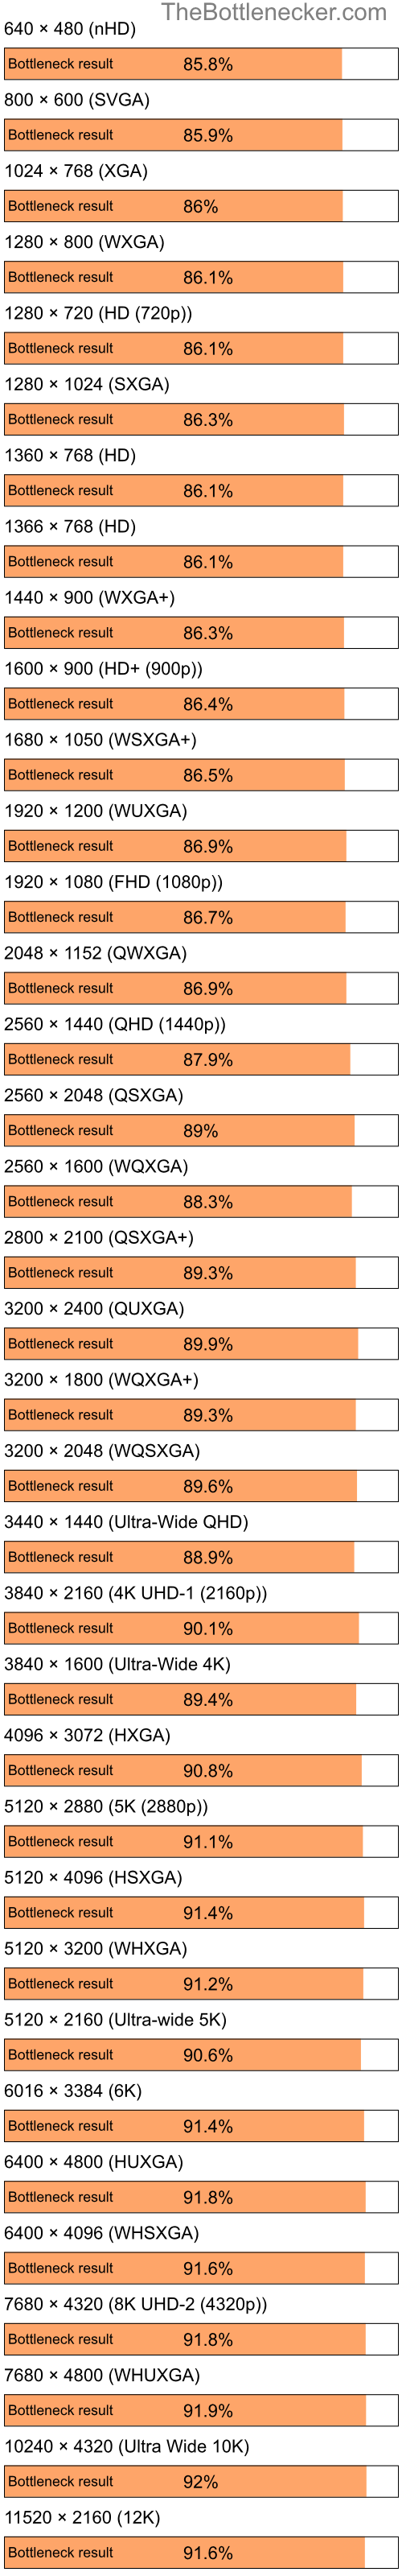 Bottleneck results by resolution for Intel Celeron and NVIDIA GeForce4 Ti 4600 in Processor Intense Tasks